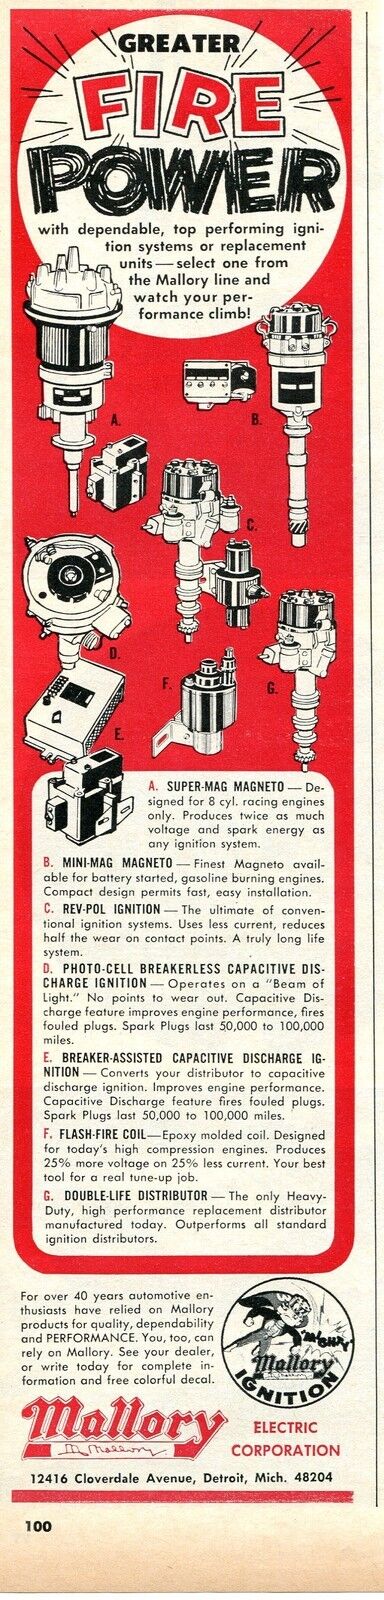 1966 Mallory Ignition Magneto Coil & Distributor Greater Fire Power Print Ad